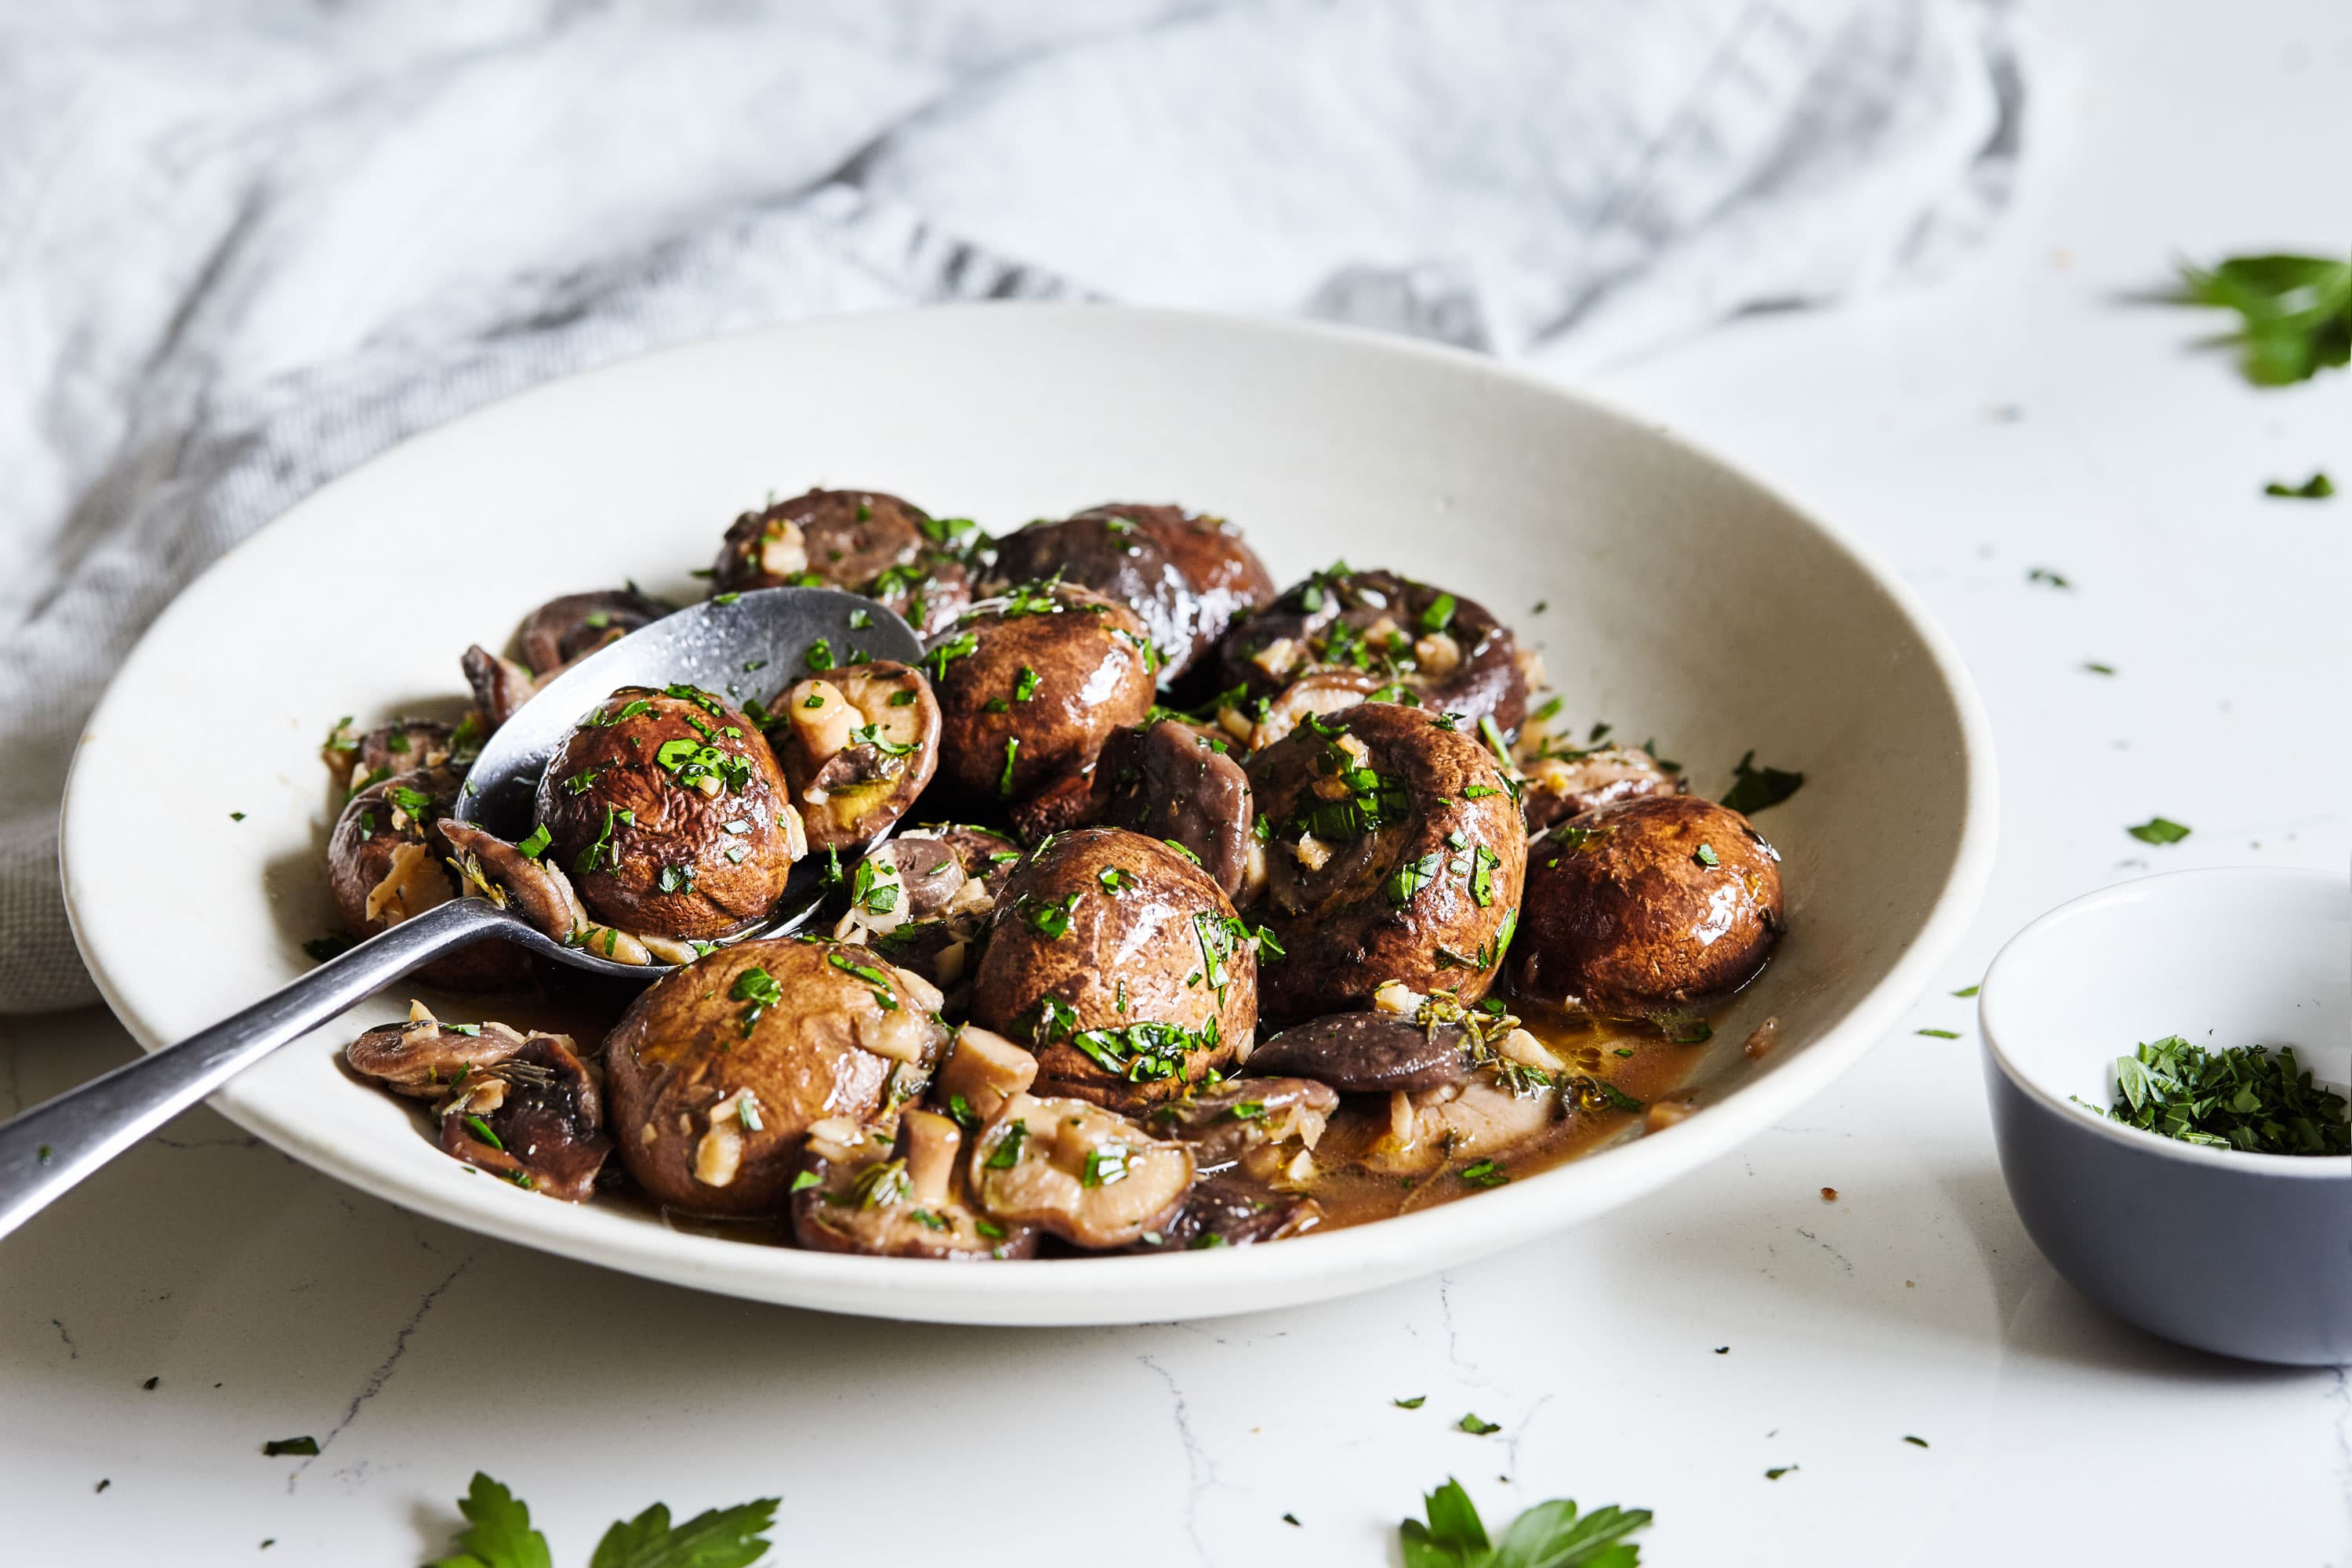 Easy Slow Cooker Recipes: Slow Cooker Mushrooms with Garlic and Herbs